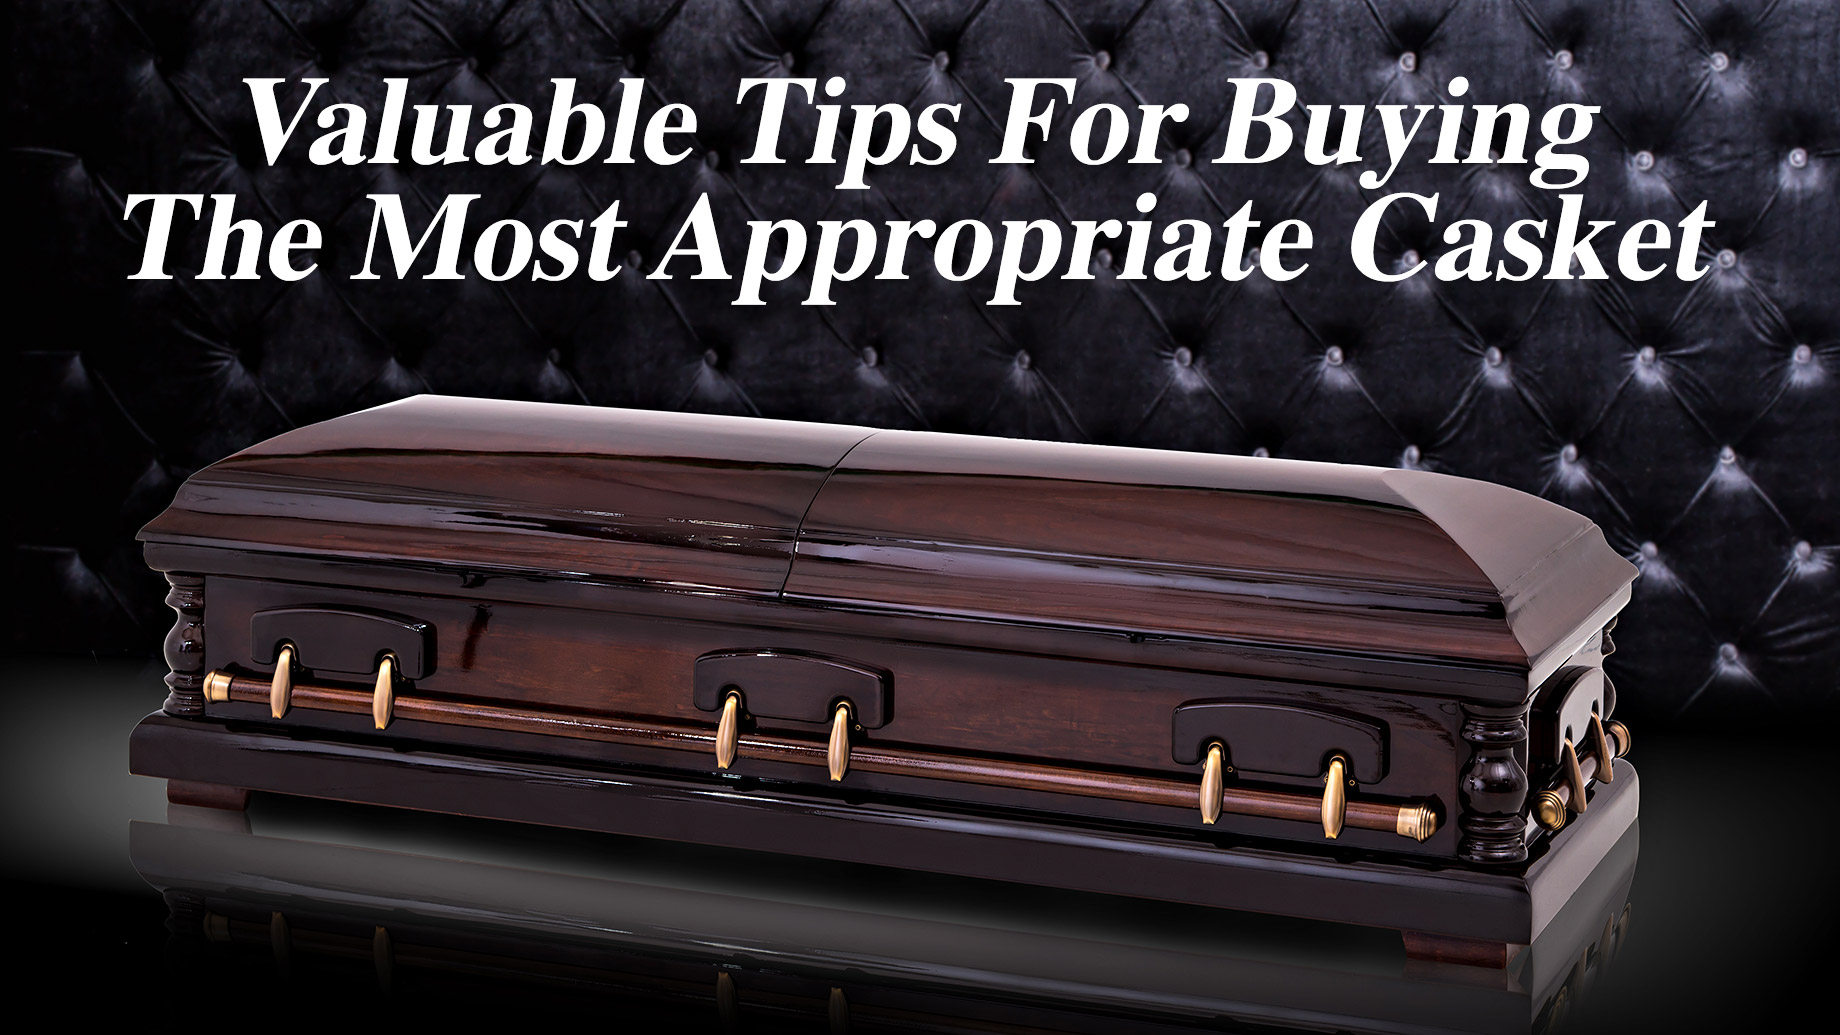 Valuable Tips For Buying The Most Appropriate Casket